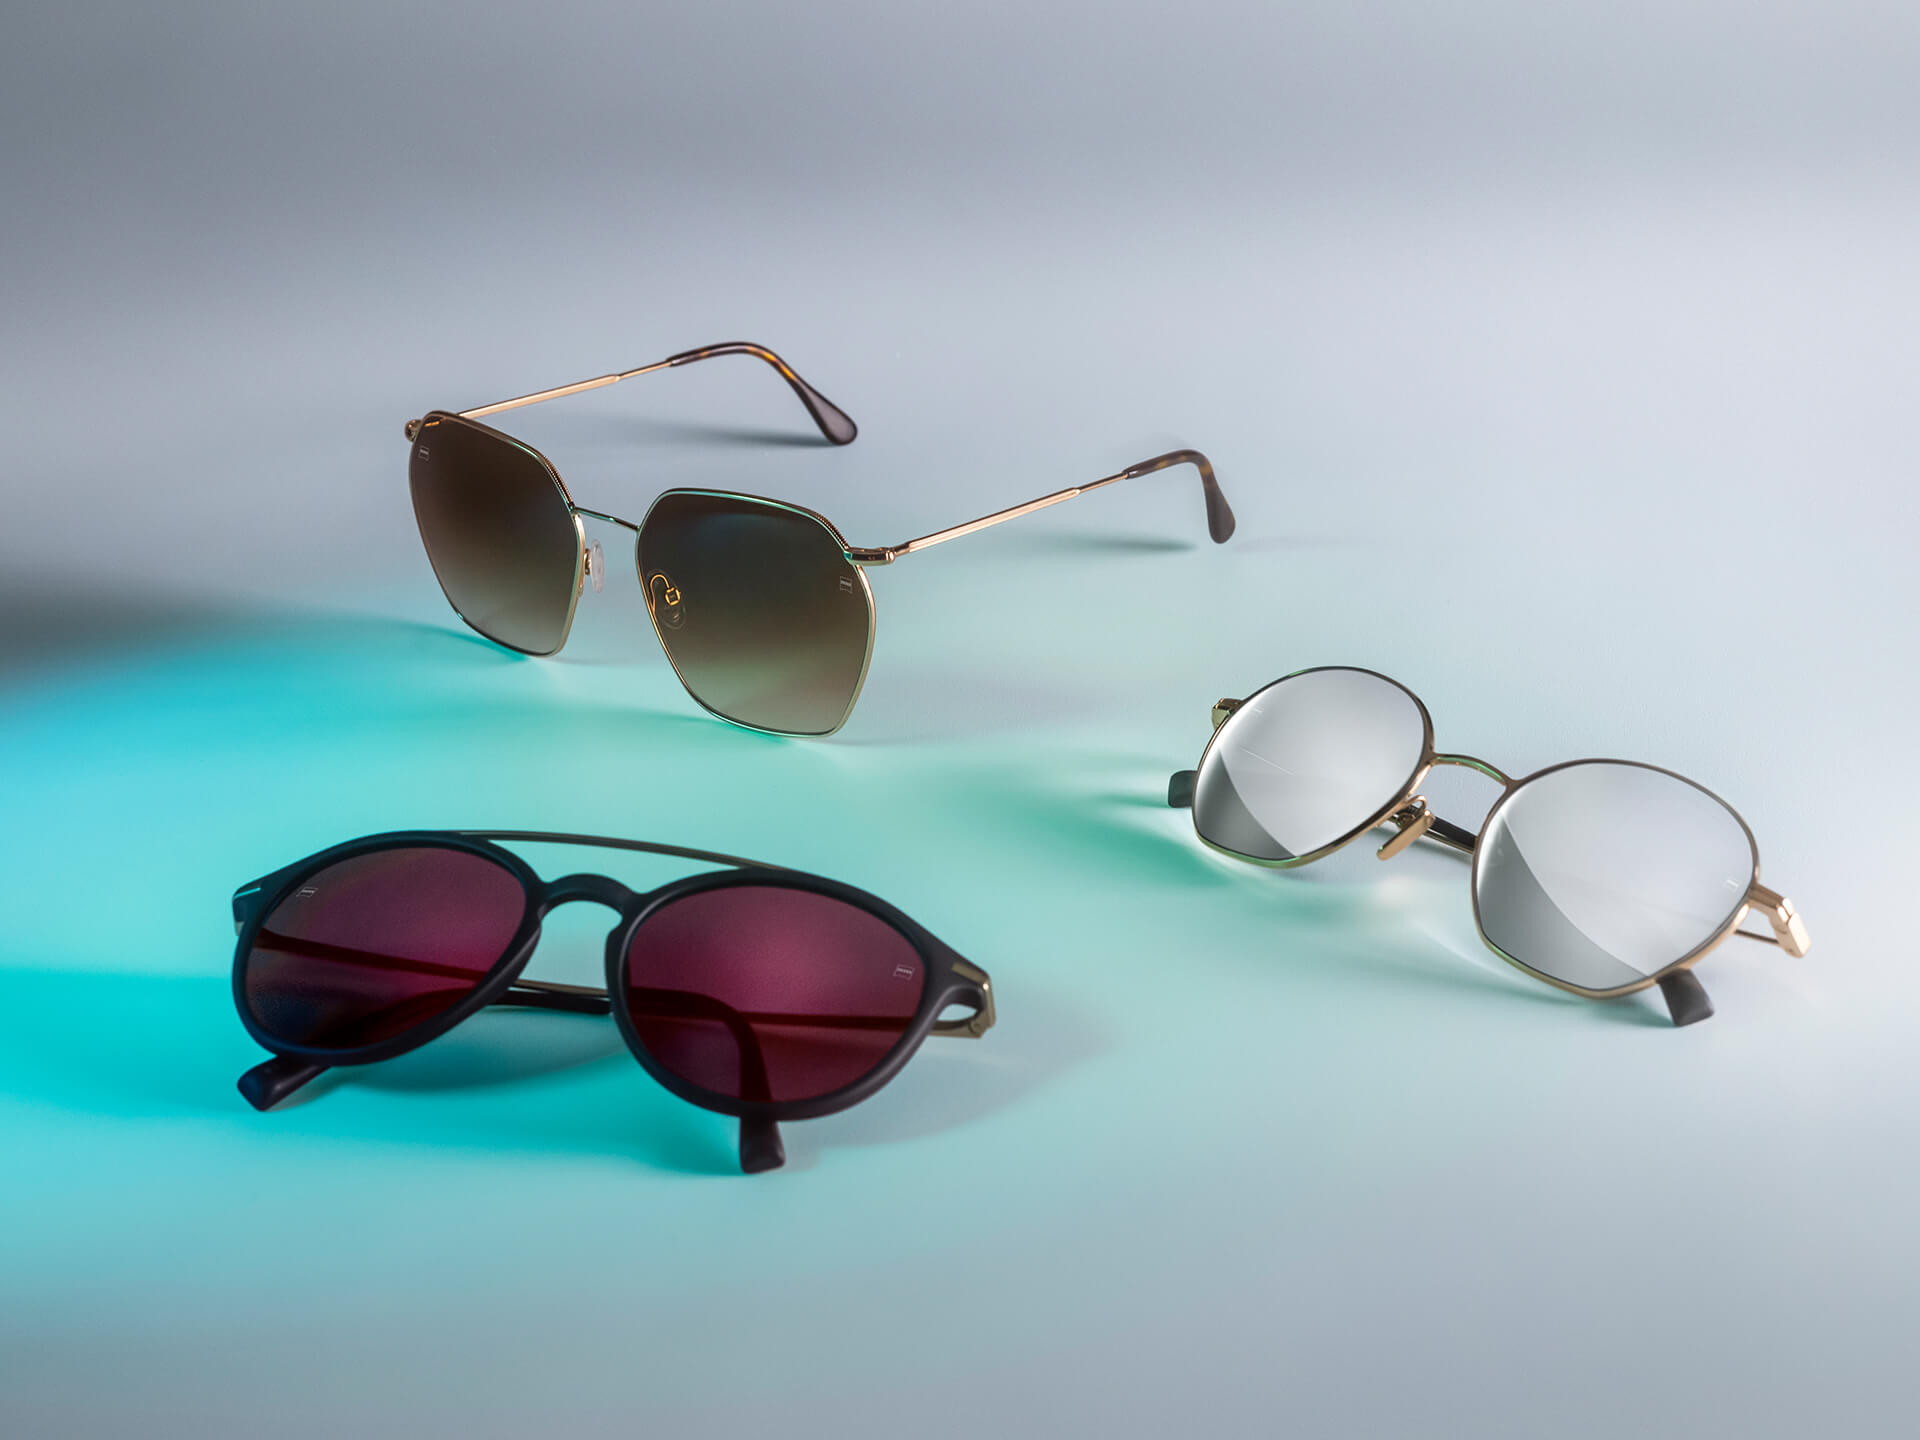 Three pairs of sunglasses with different coloured ZEISS sunglass lenses, featuring DuraVision Sun, DuraVision Mirror, and Flash Mirror coatings, visible on a white background with blue light reflection.